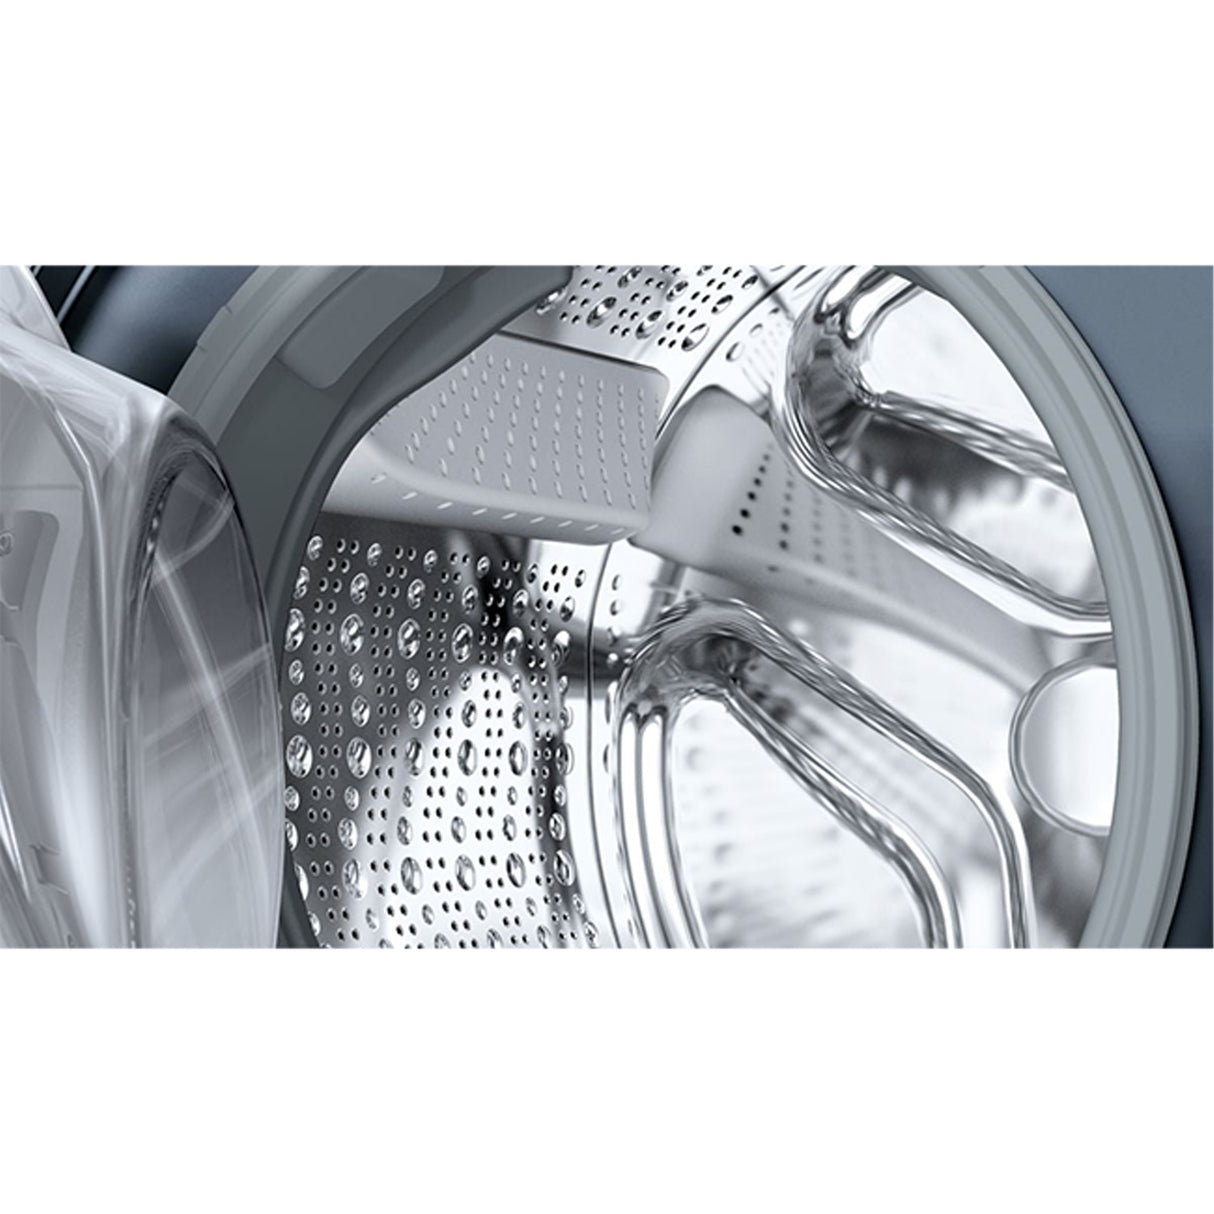 Bosch Series 6 Front-Loading Washer: 8 kg, 1400 RPM - Reliable and efficient.